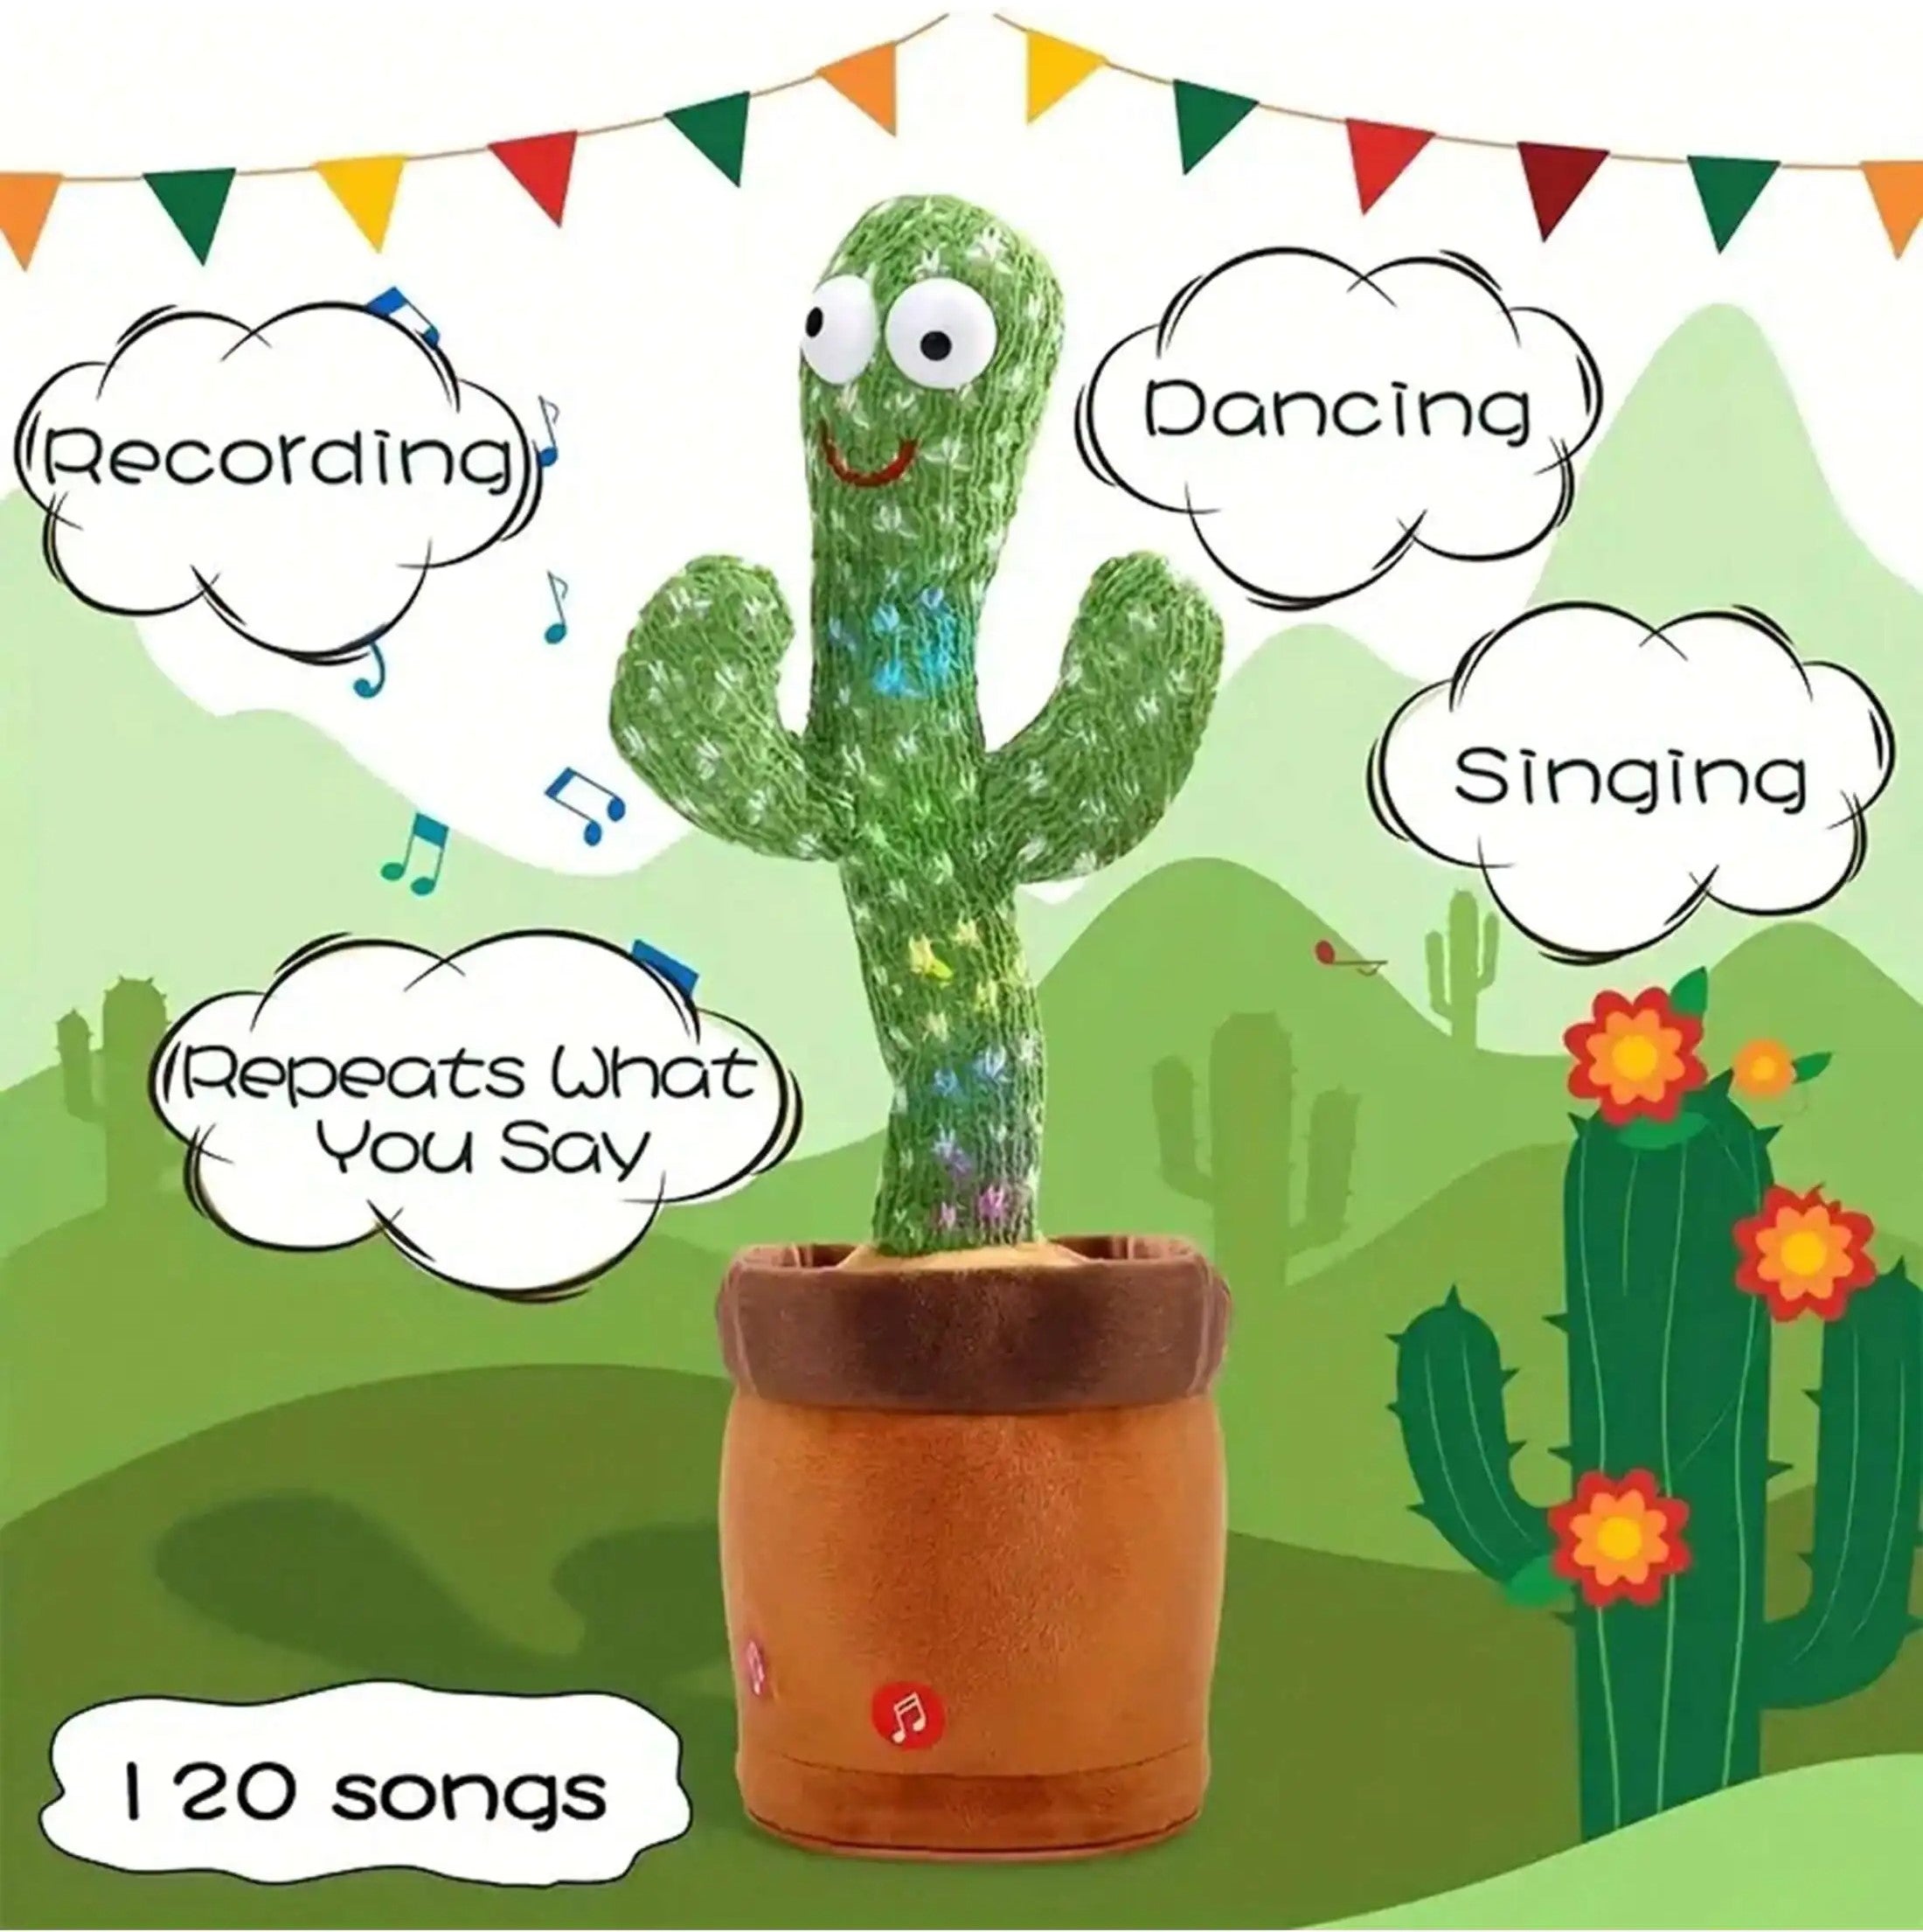 Dancing Cactus Toy with Music & Lights: Repeating Mimic Toy for Kids